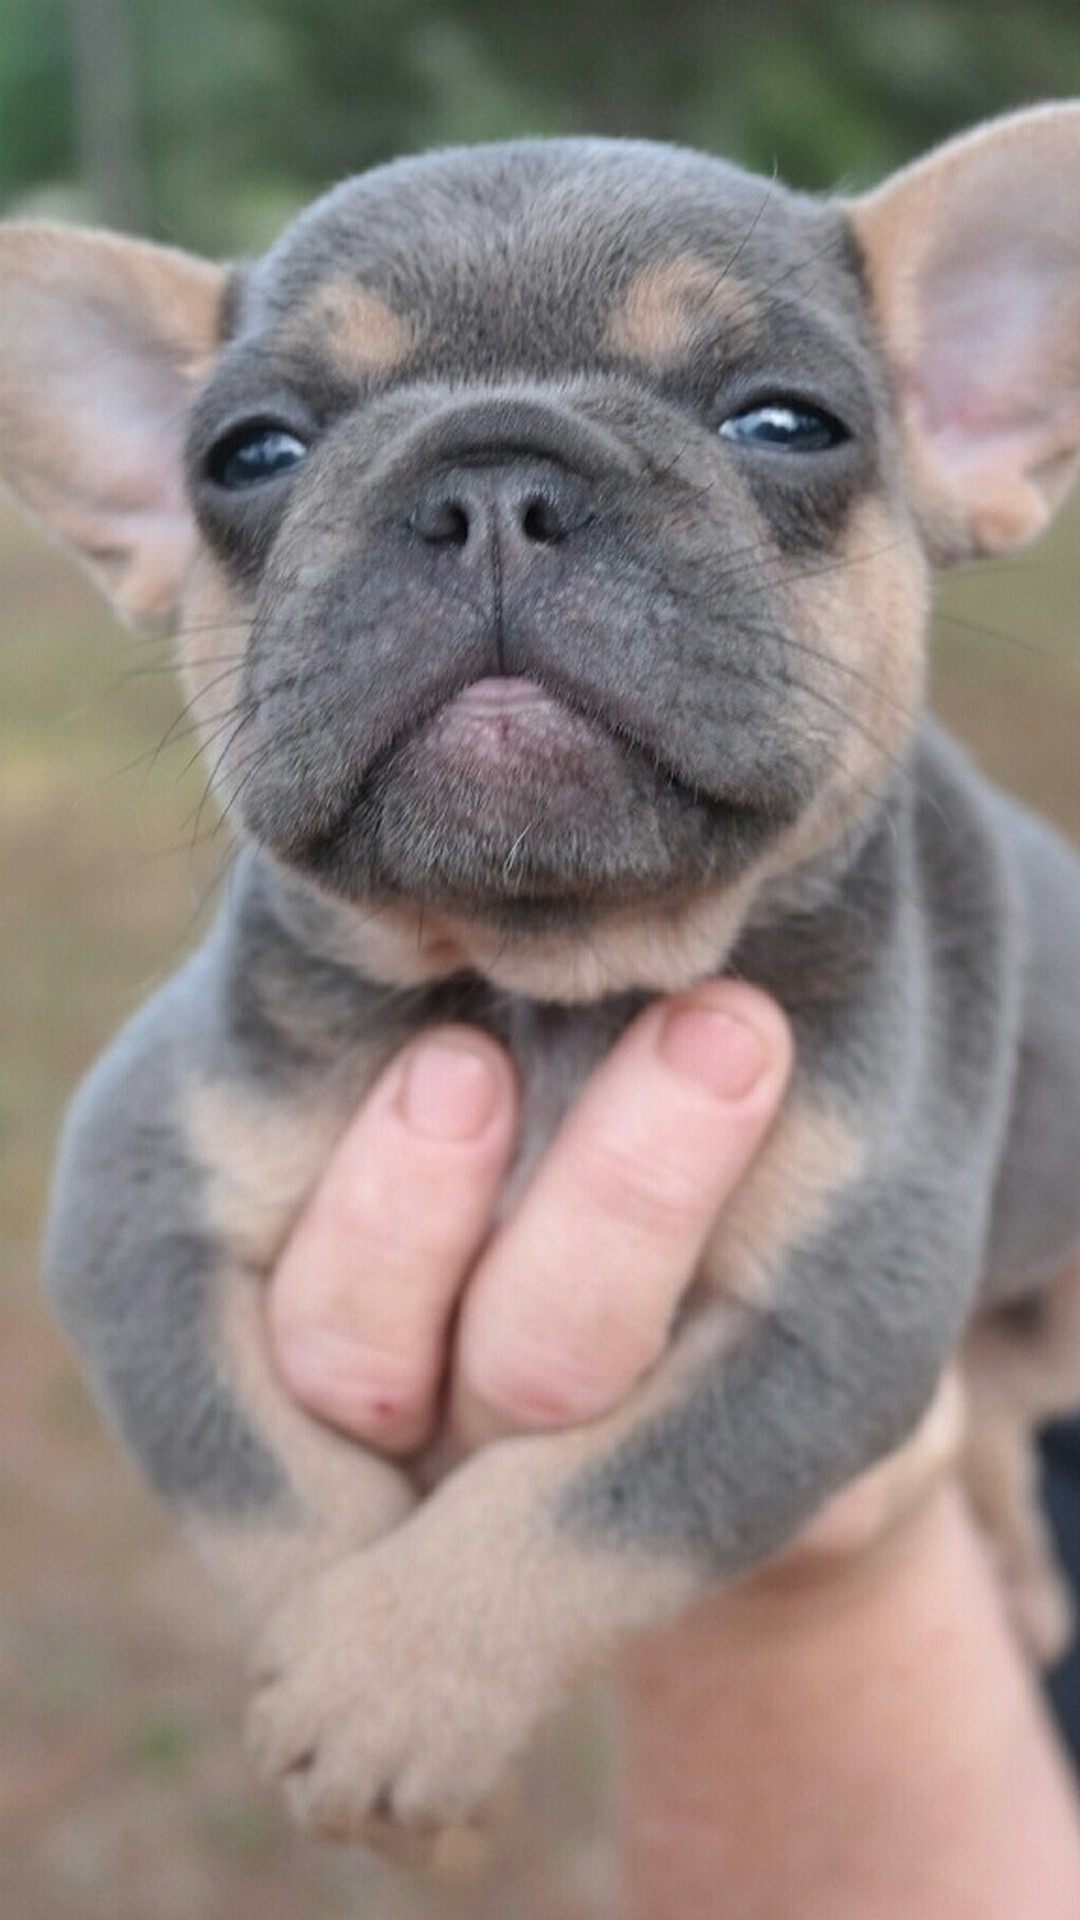 Puppy Wallpaper For iPhone resolution 1080x1920